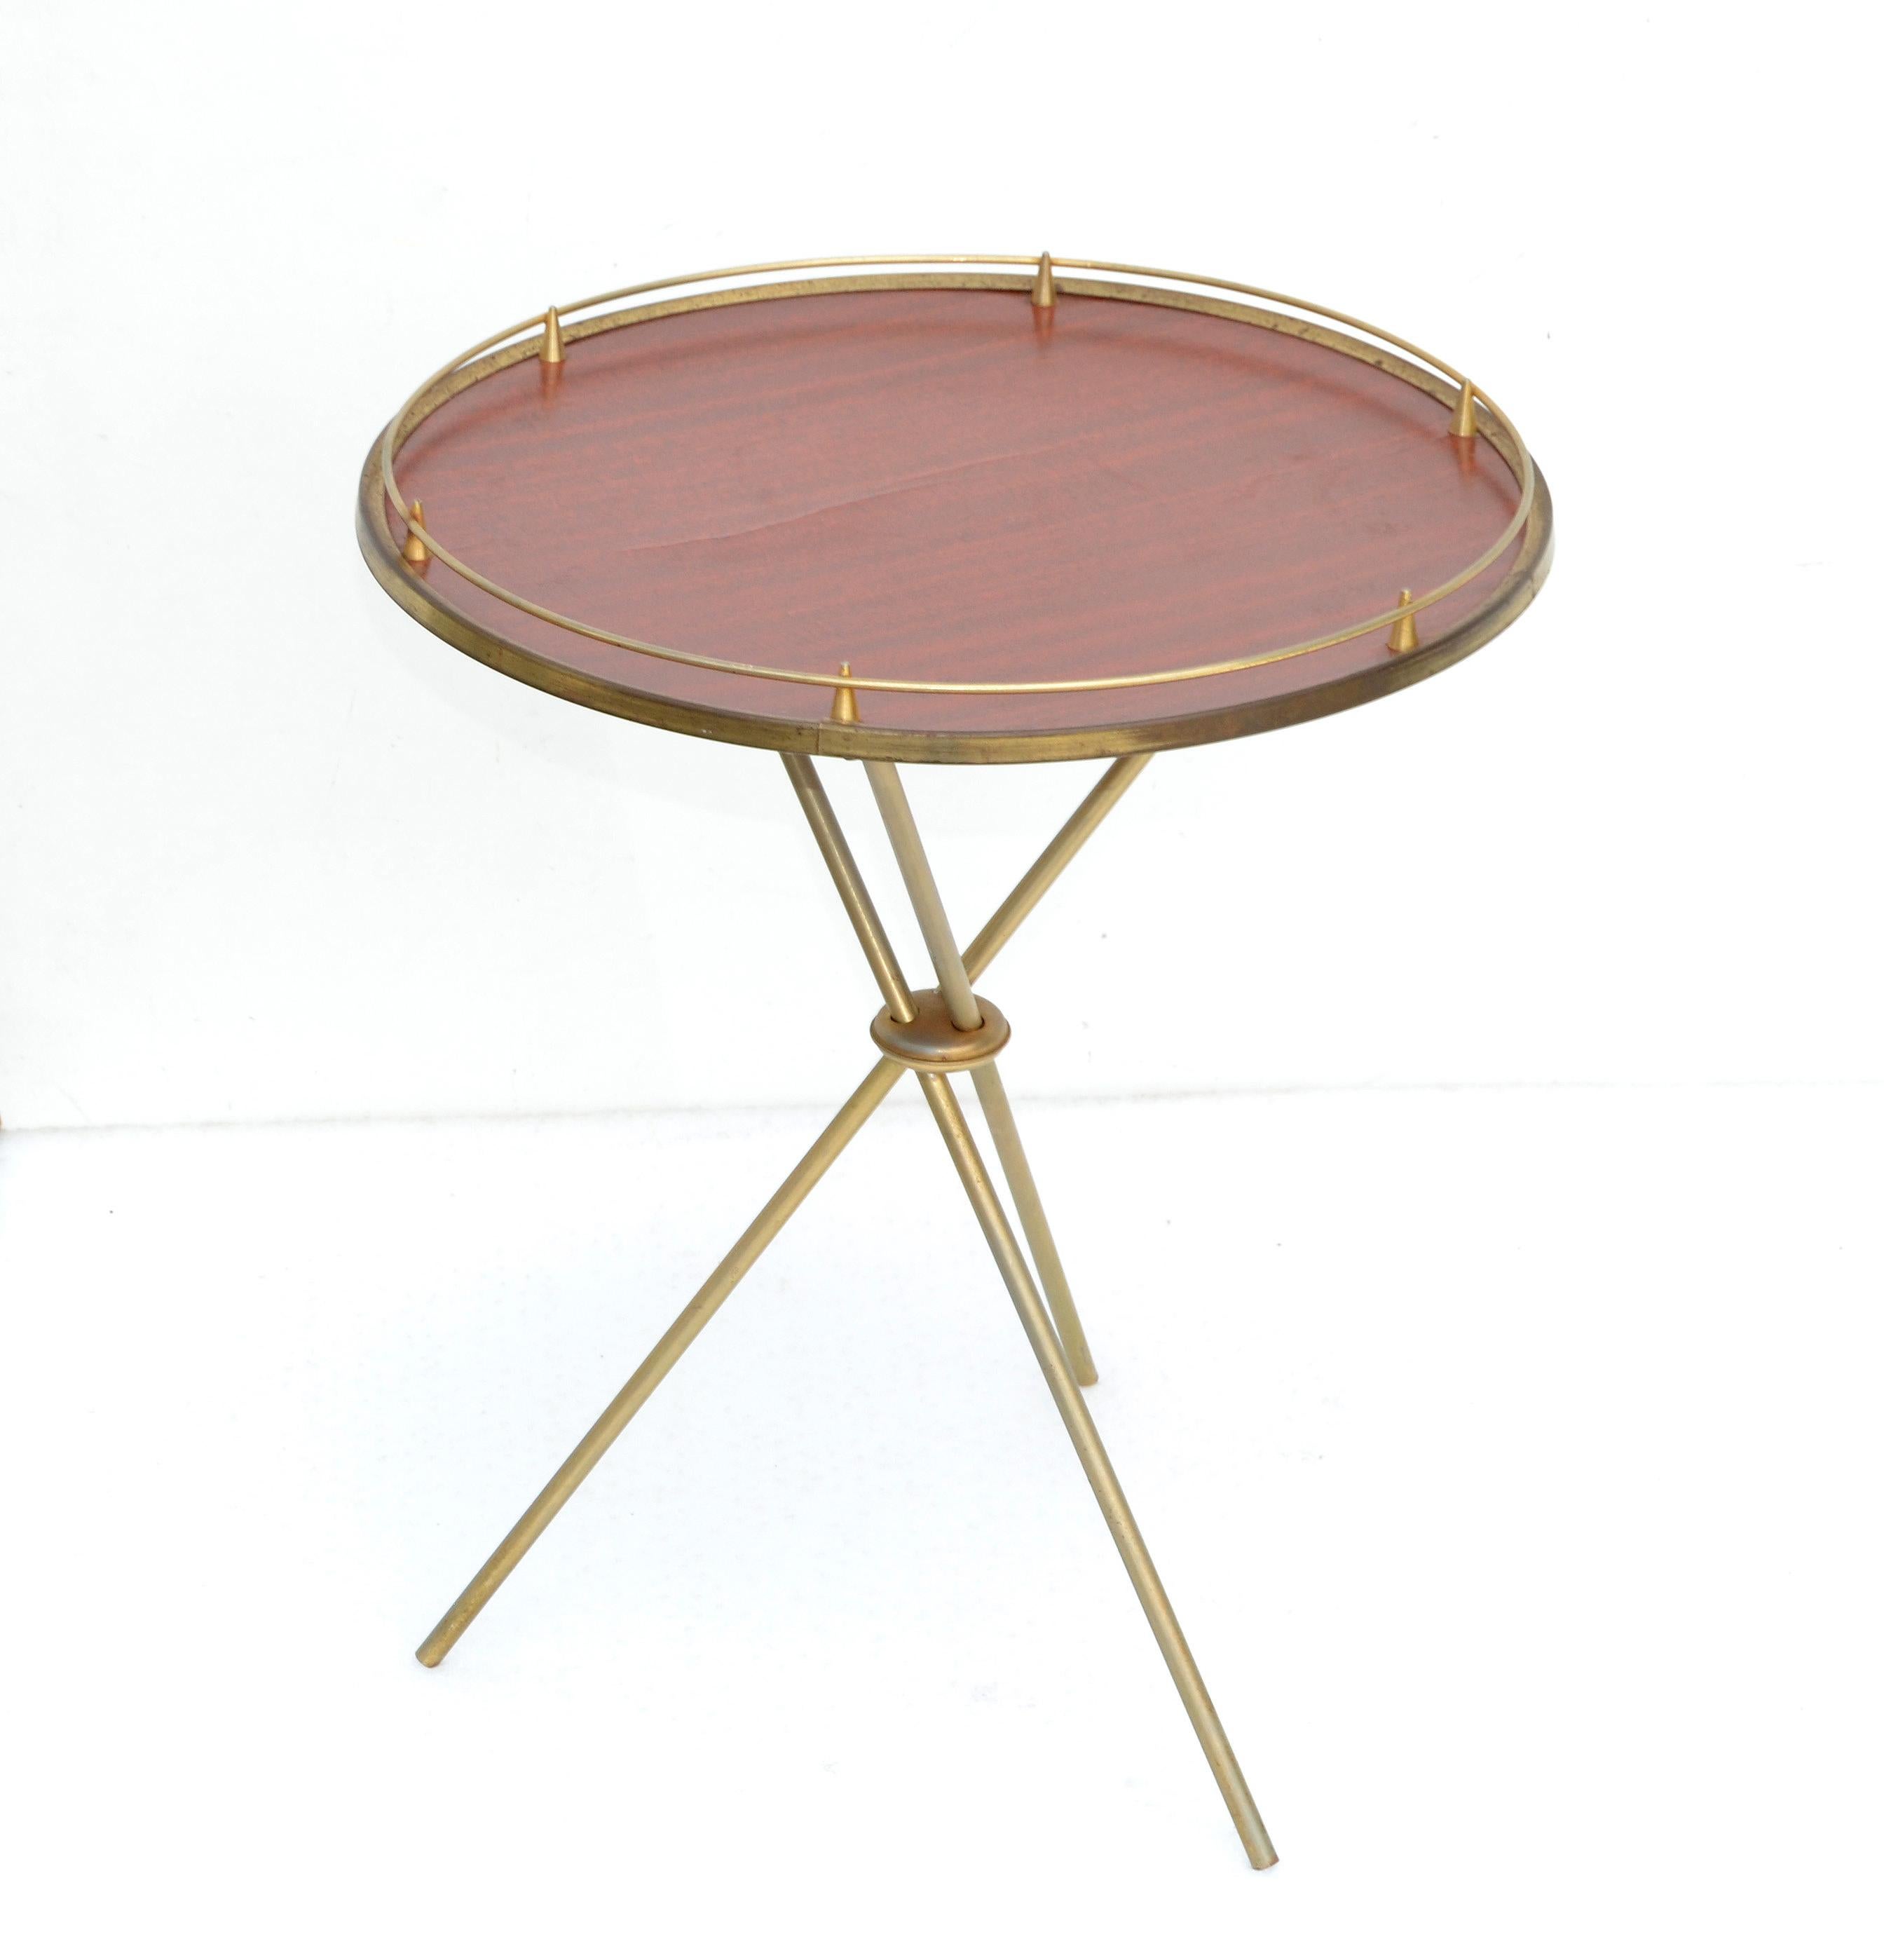 Pair of small round laminated side table by Maison Jansen French Mid-Century Modern circa 1955.
Elegant Gio Ponti Style Tripod Base in Brass and Decorative cast galleries give this piece a neoclassical flair. 
Simply lovely & practical.